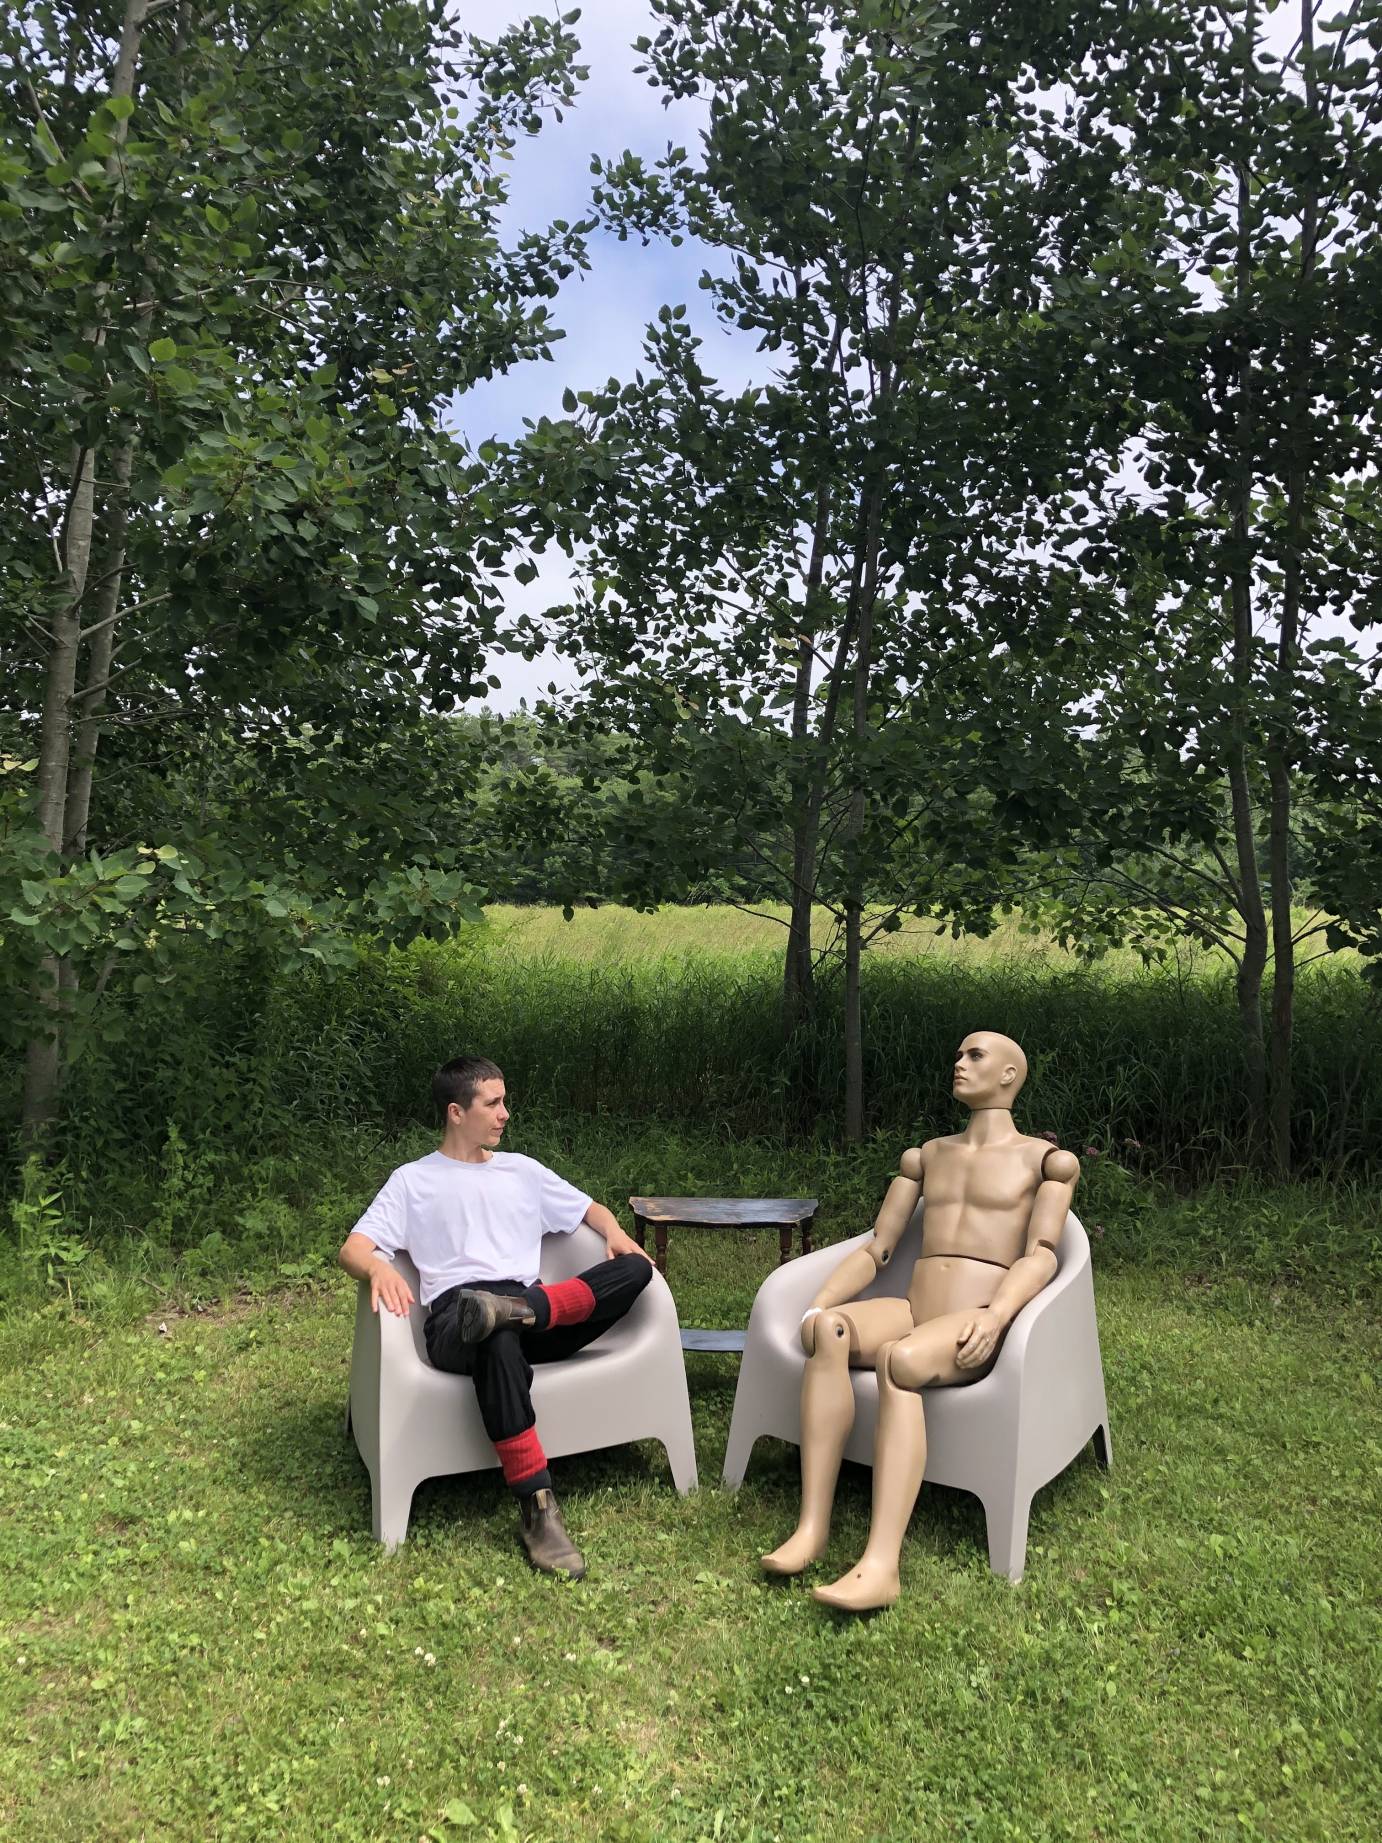 In a grassy glade, devynn emory and manny the mannequin sit in lawn chairs staring at each other